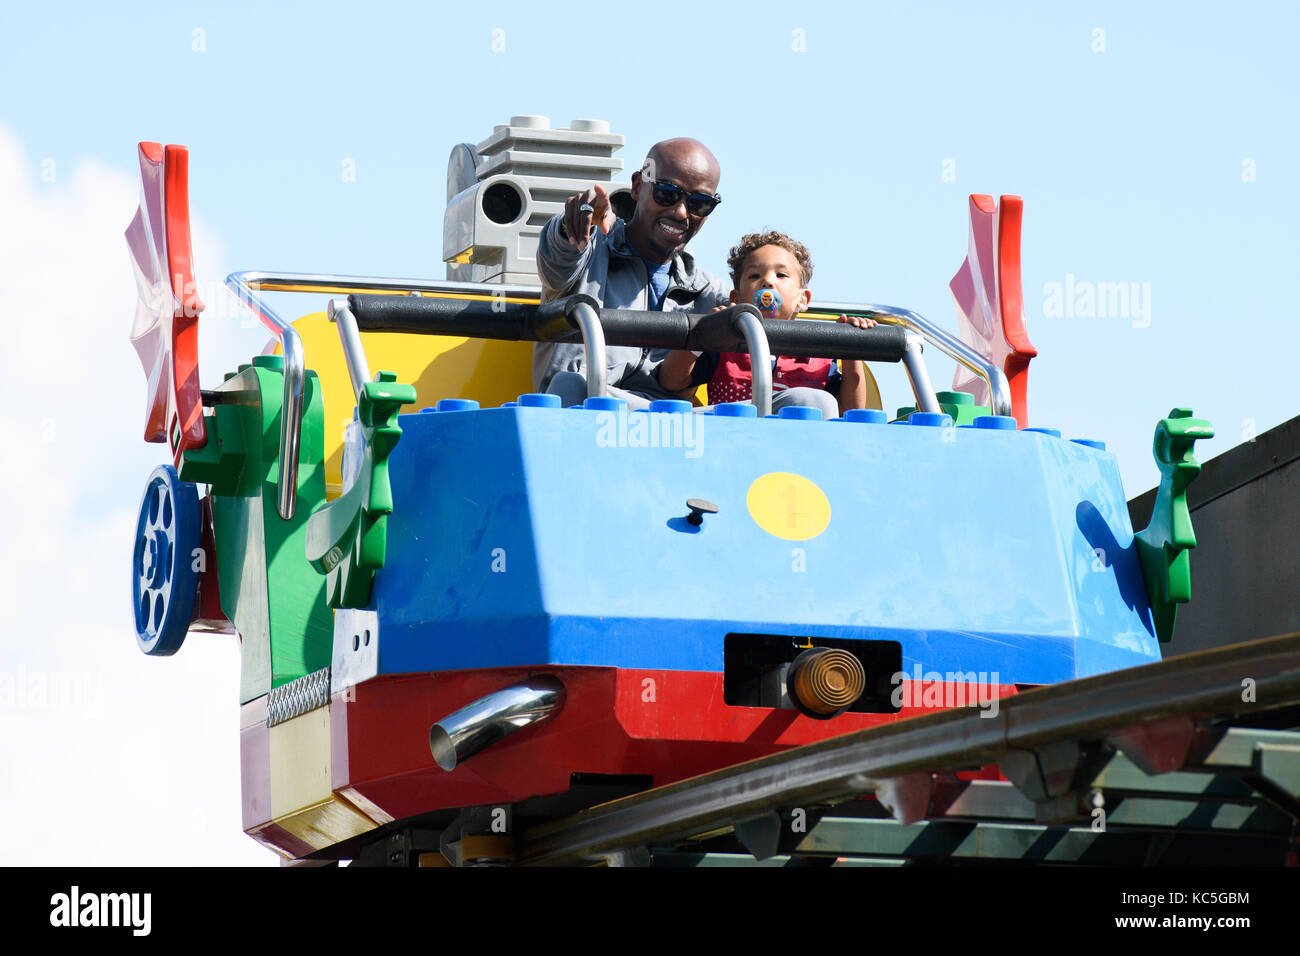 Mo Farah out and about in Legoland resort Windsor with his family earlier today  Featuring: Mo Farah, Hussein Farah Where: Windsor, United Kingdom When: 01 Sep 2017 Credit: WENN.com Stock Photo